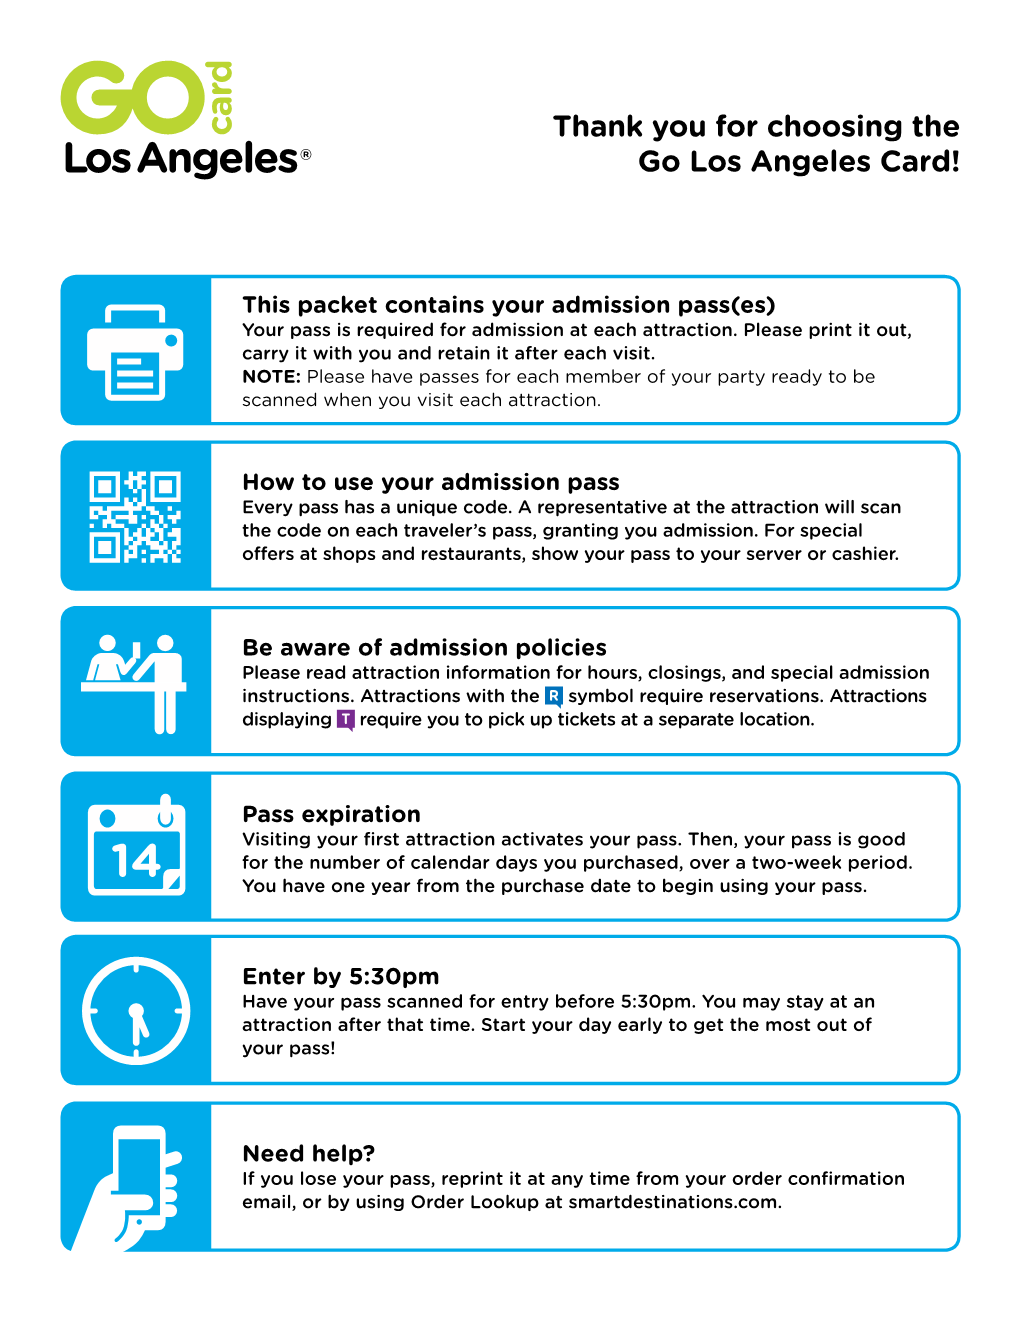 Thank You for Choosing the Go Los Angeles Card!